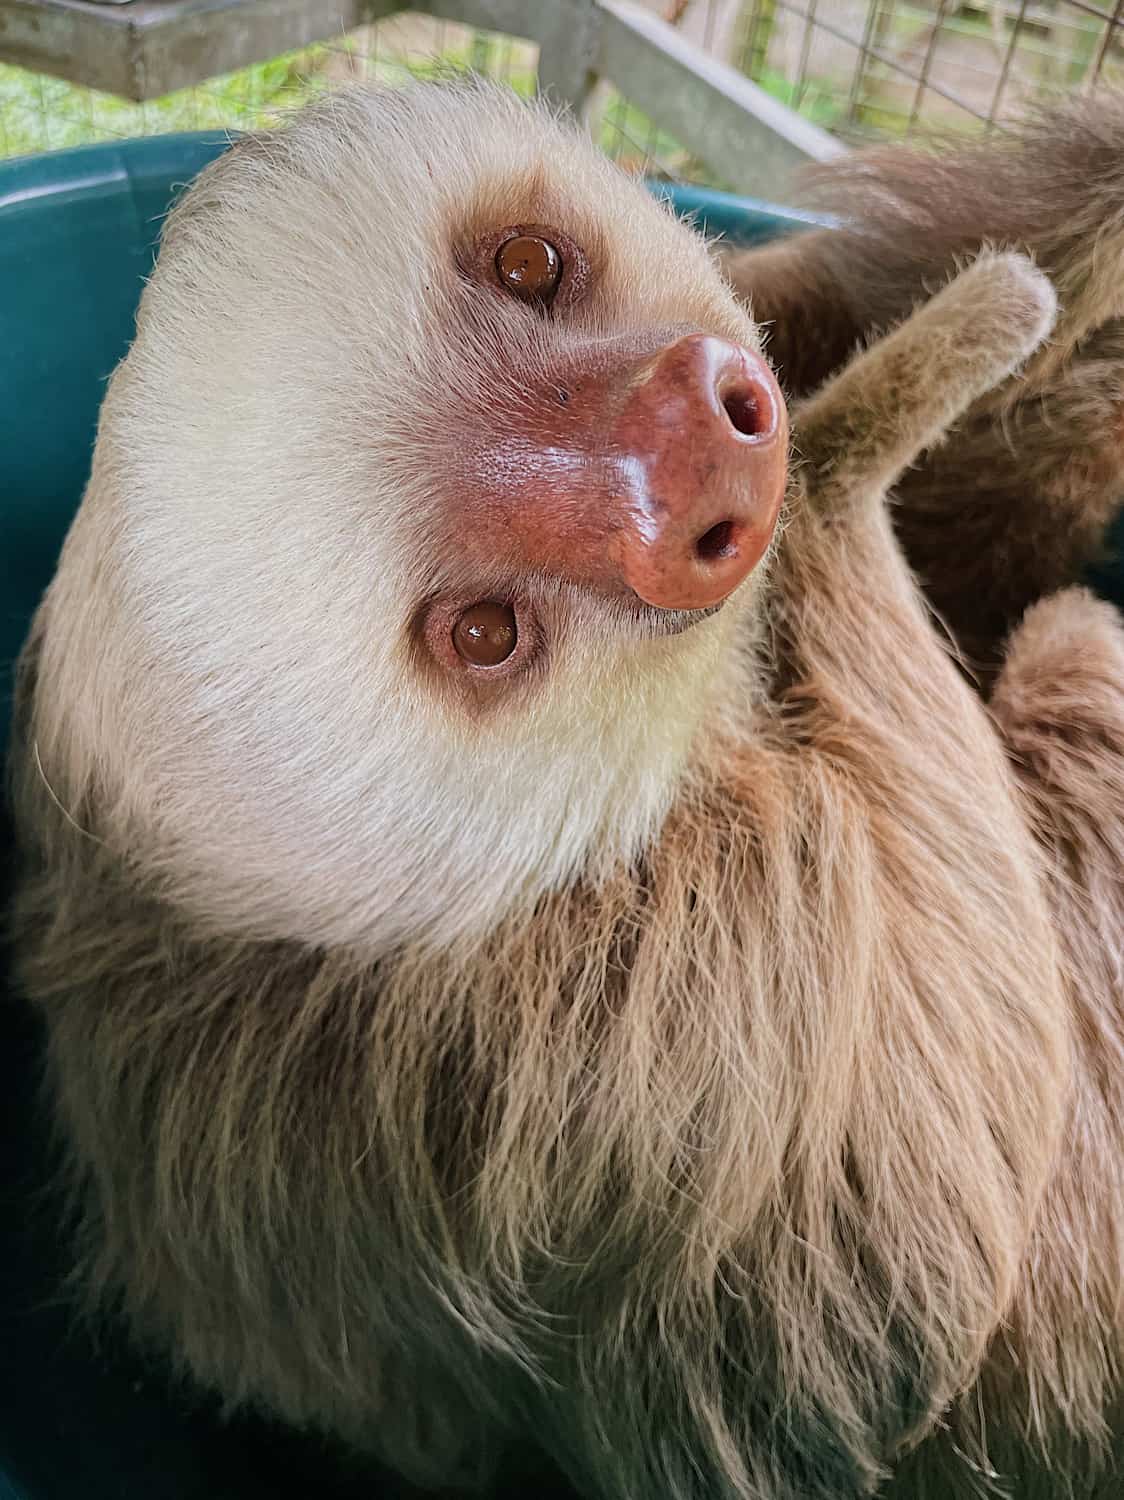 A rescued sloth at Toucan Rescue Ranch in Costa Rica.